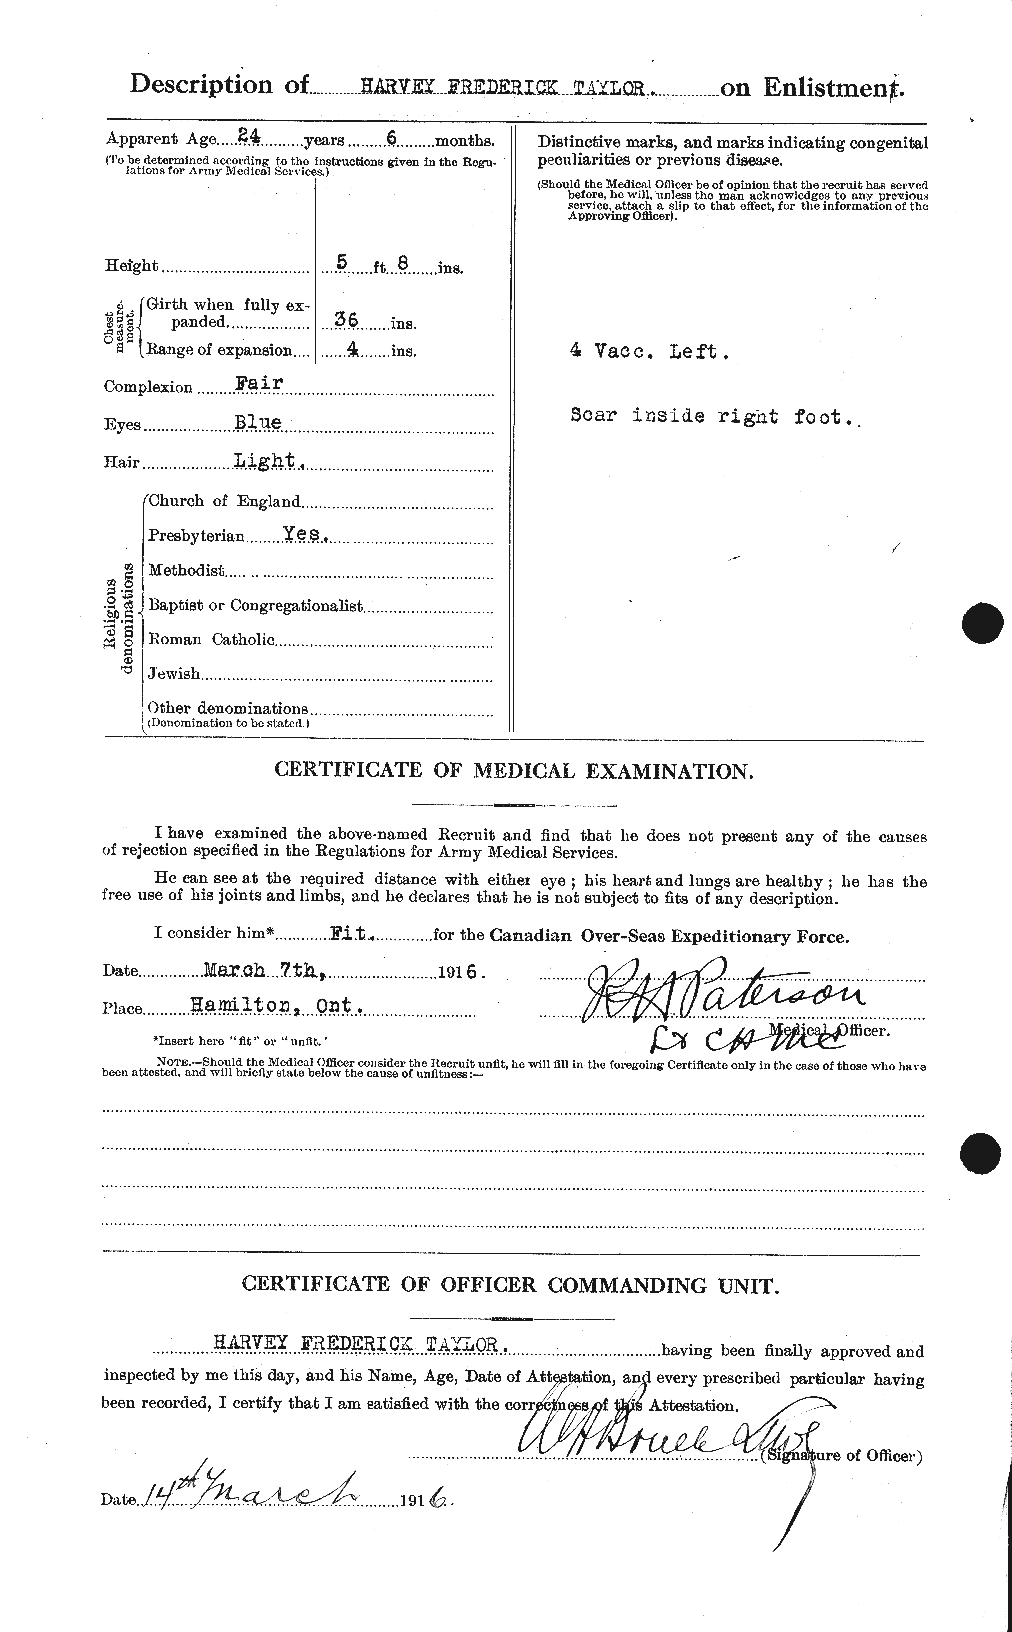 Personnel Records of the First World War - CEF 626510b